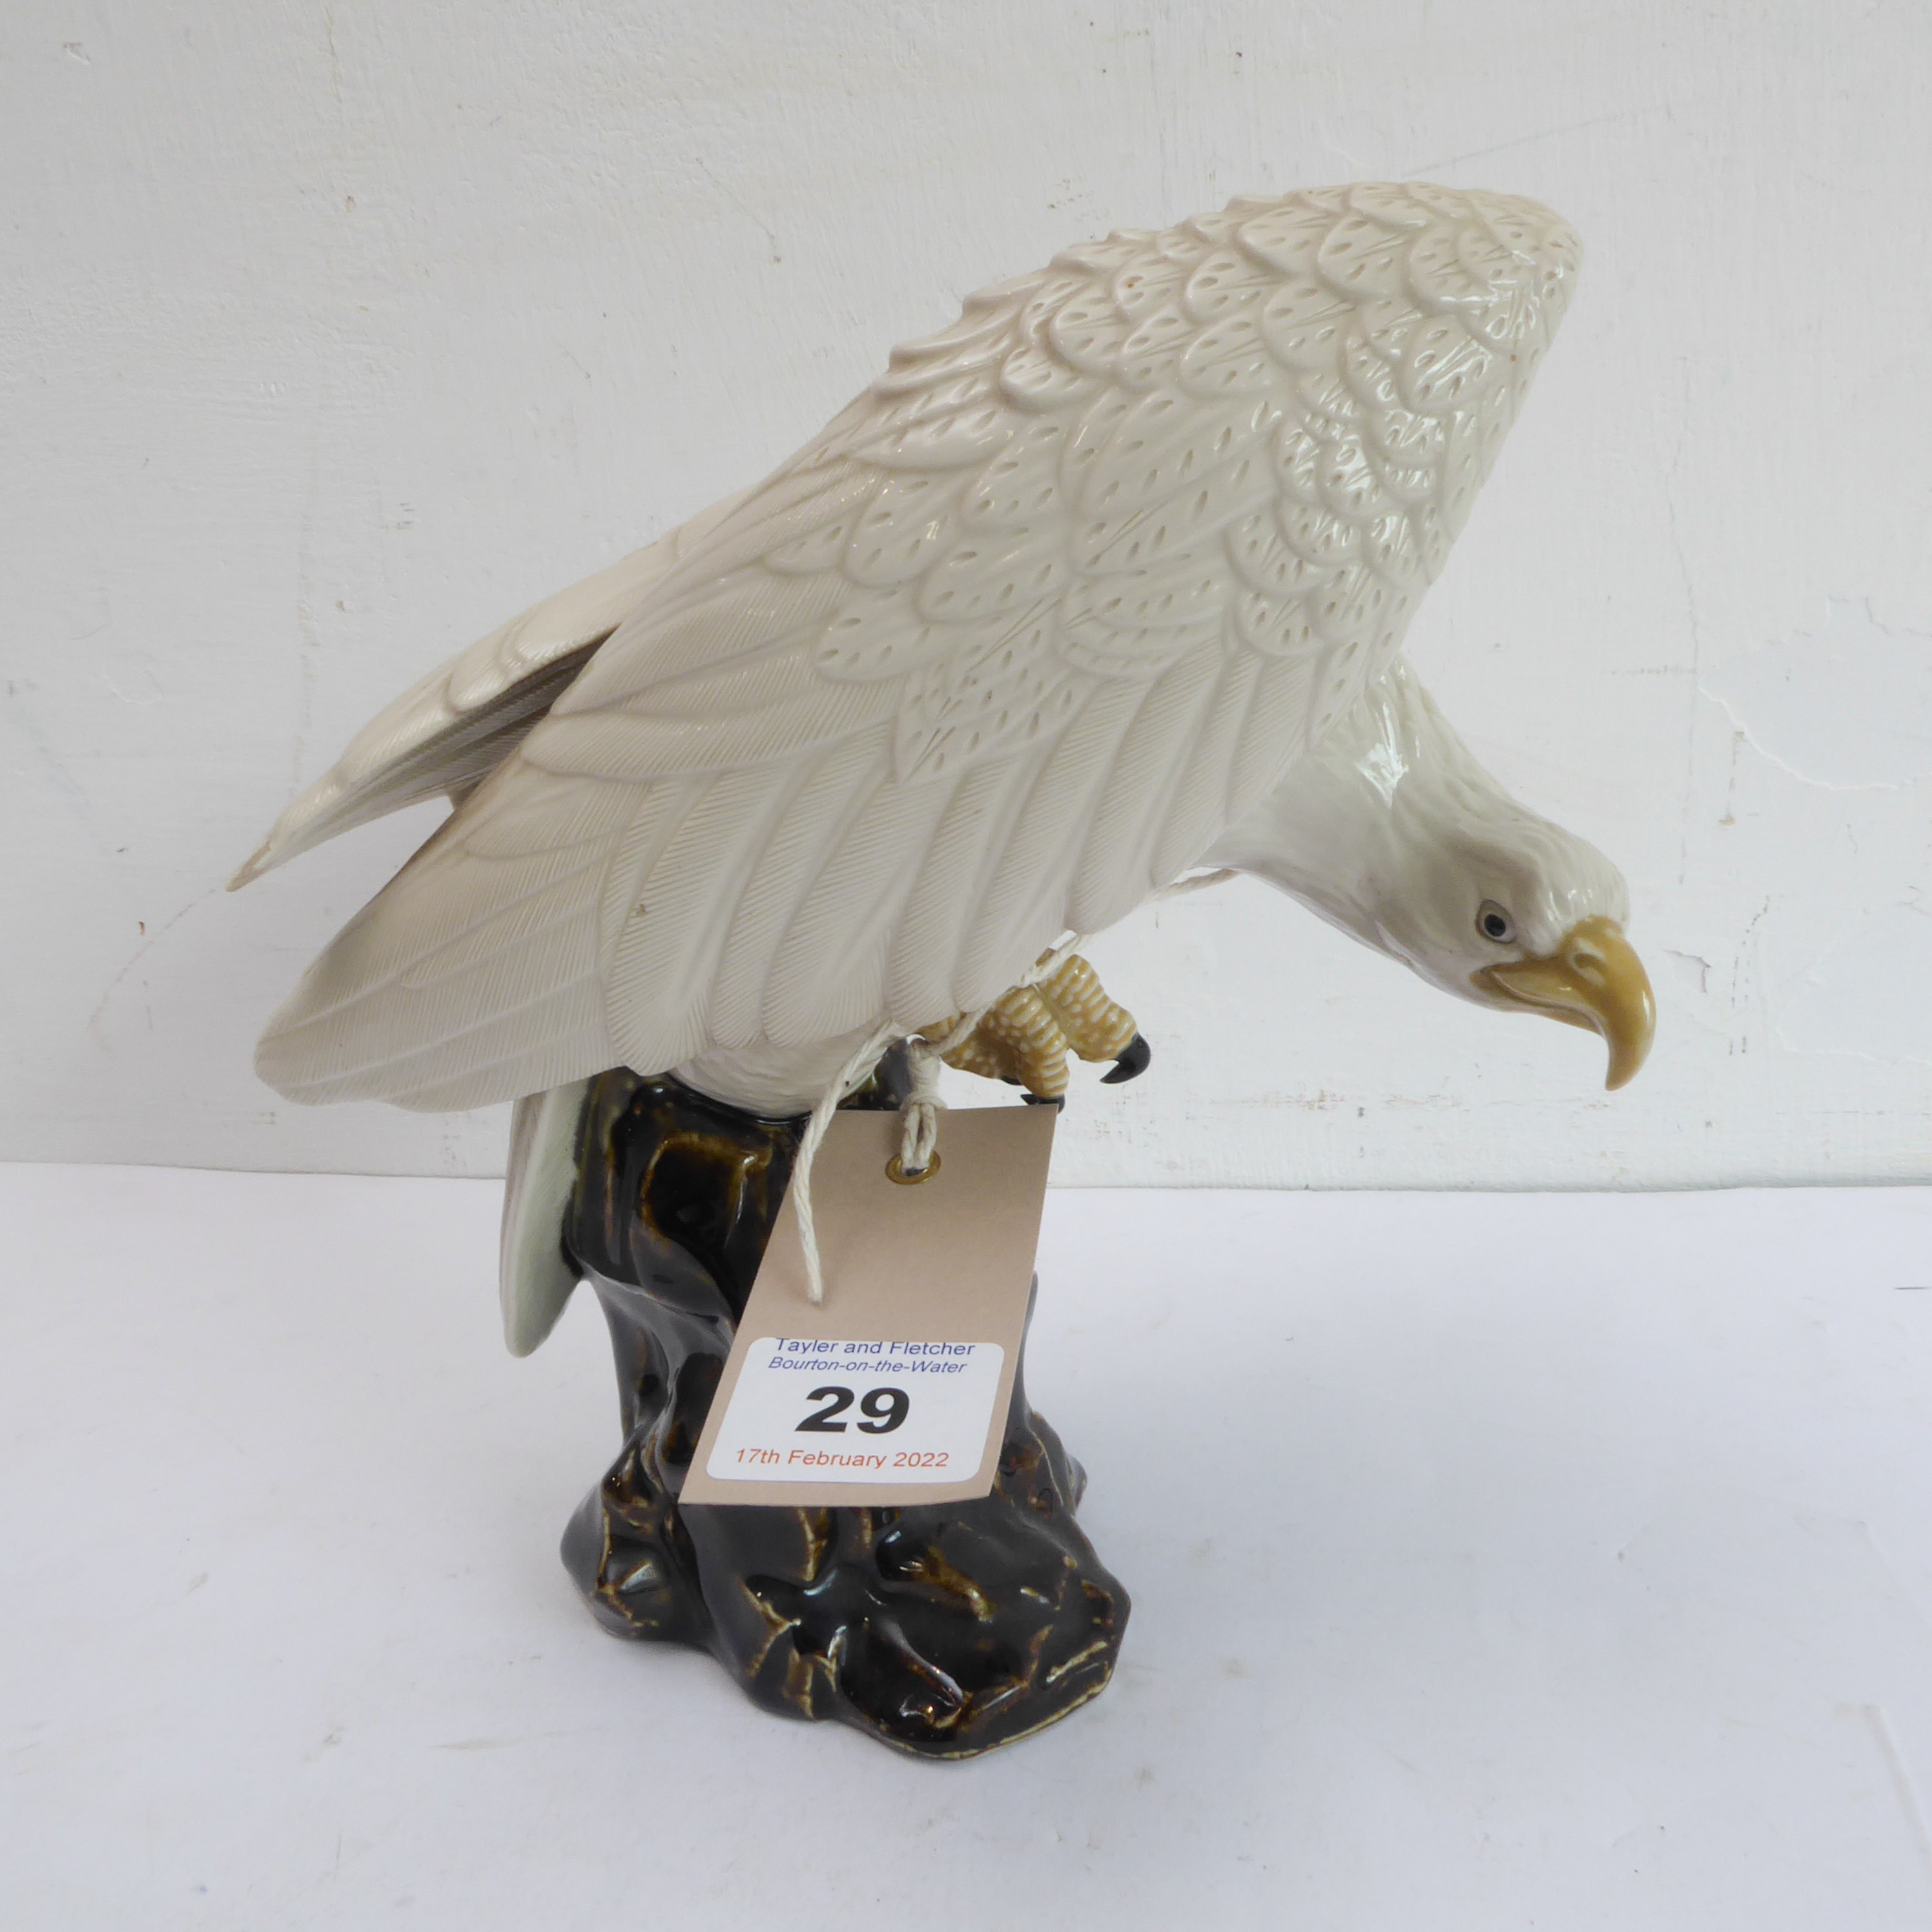 A 20th century hand-decorated porcelain model of a large white eagle perched upon rockwork (possibly